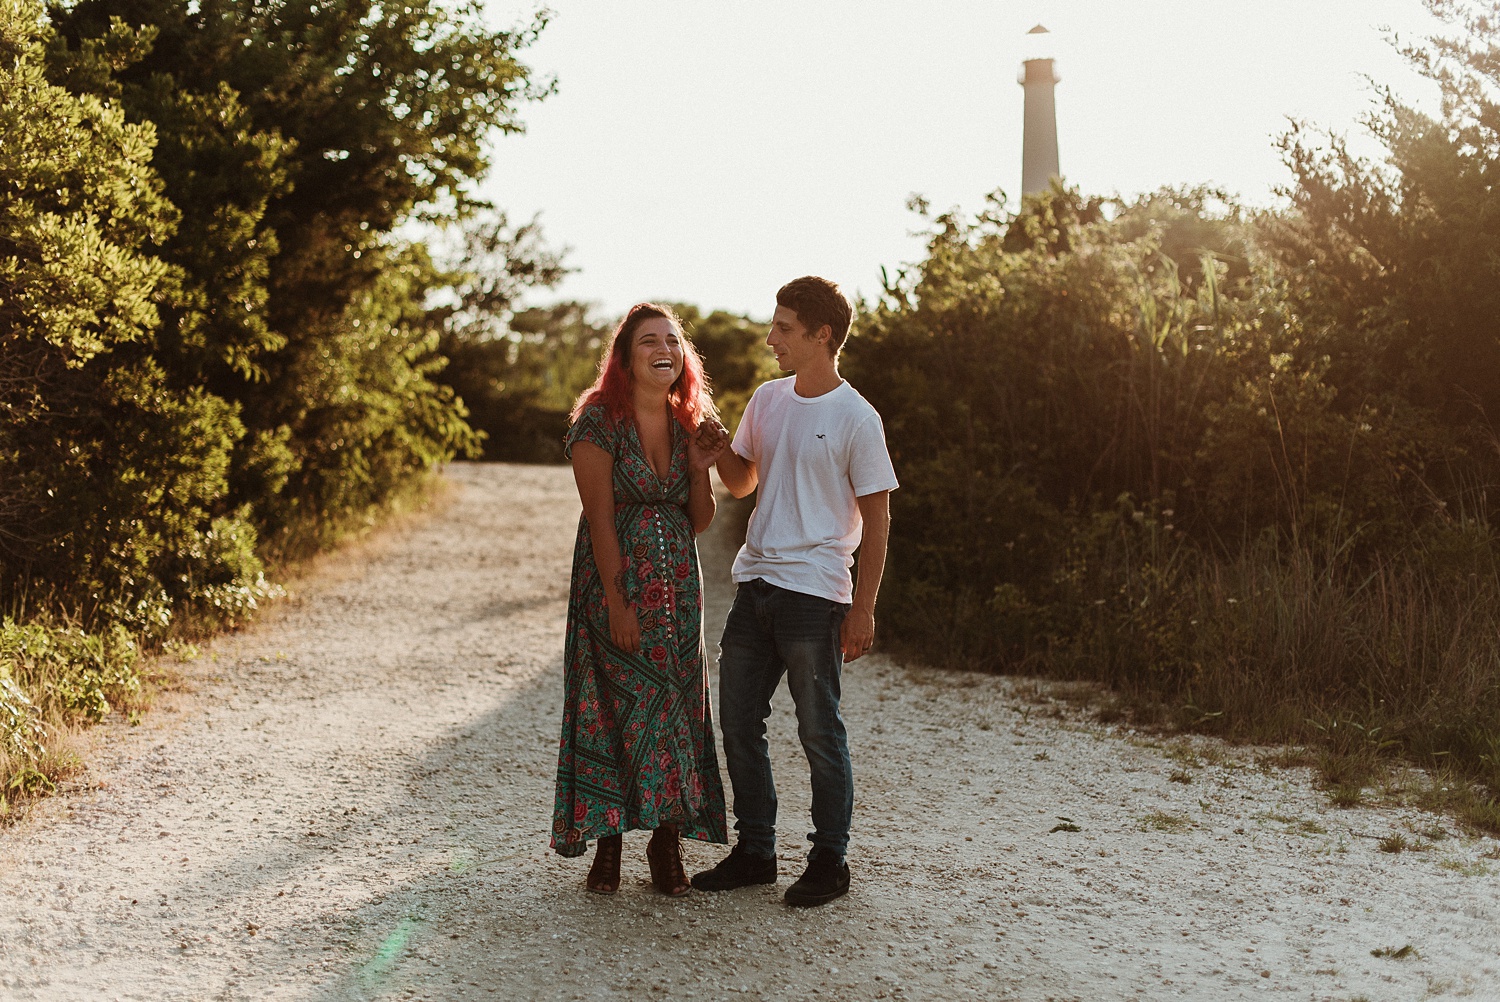 capemay-engagementsession_0013.jpg